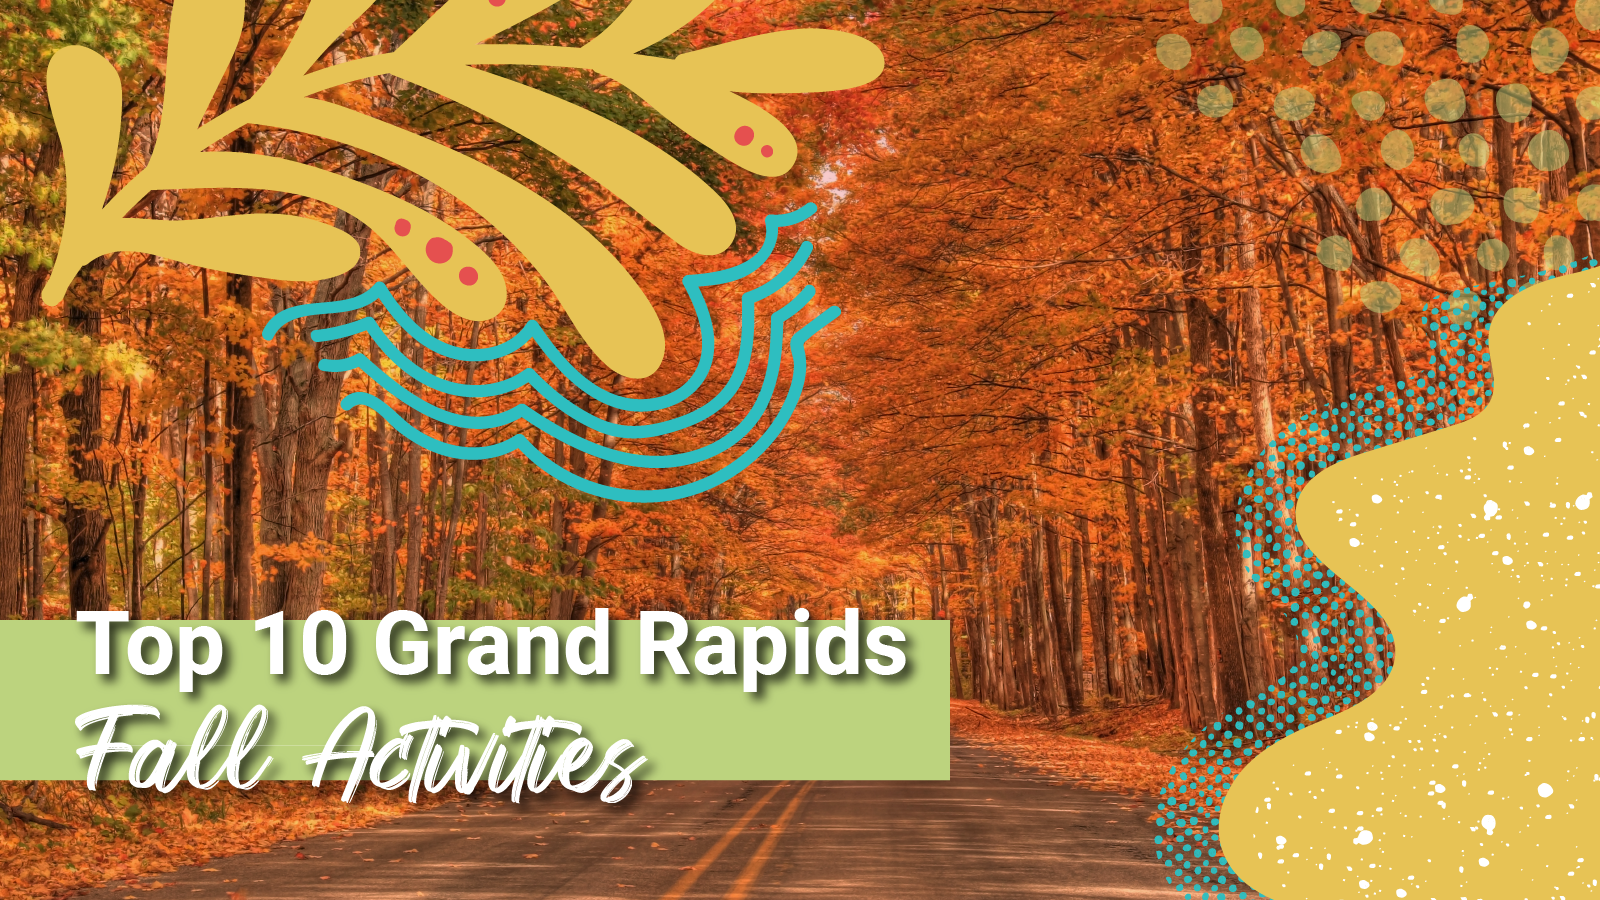 A tree laden road with autumn colors in full bloom behind the words, "Grand Rapids Fall Activities"